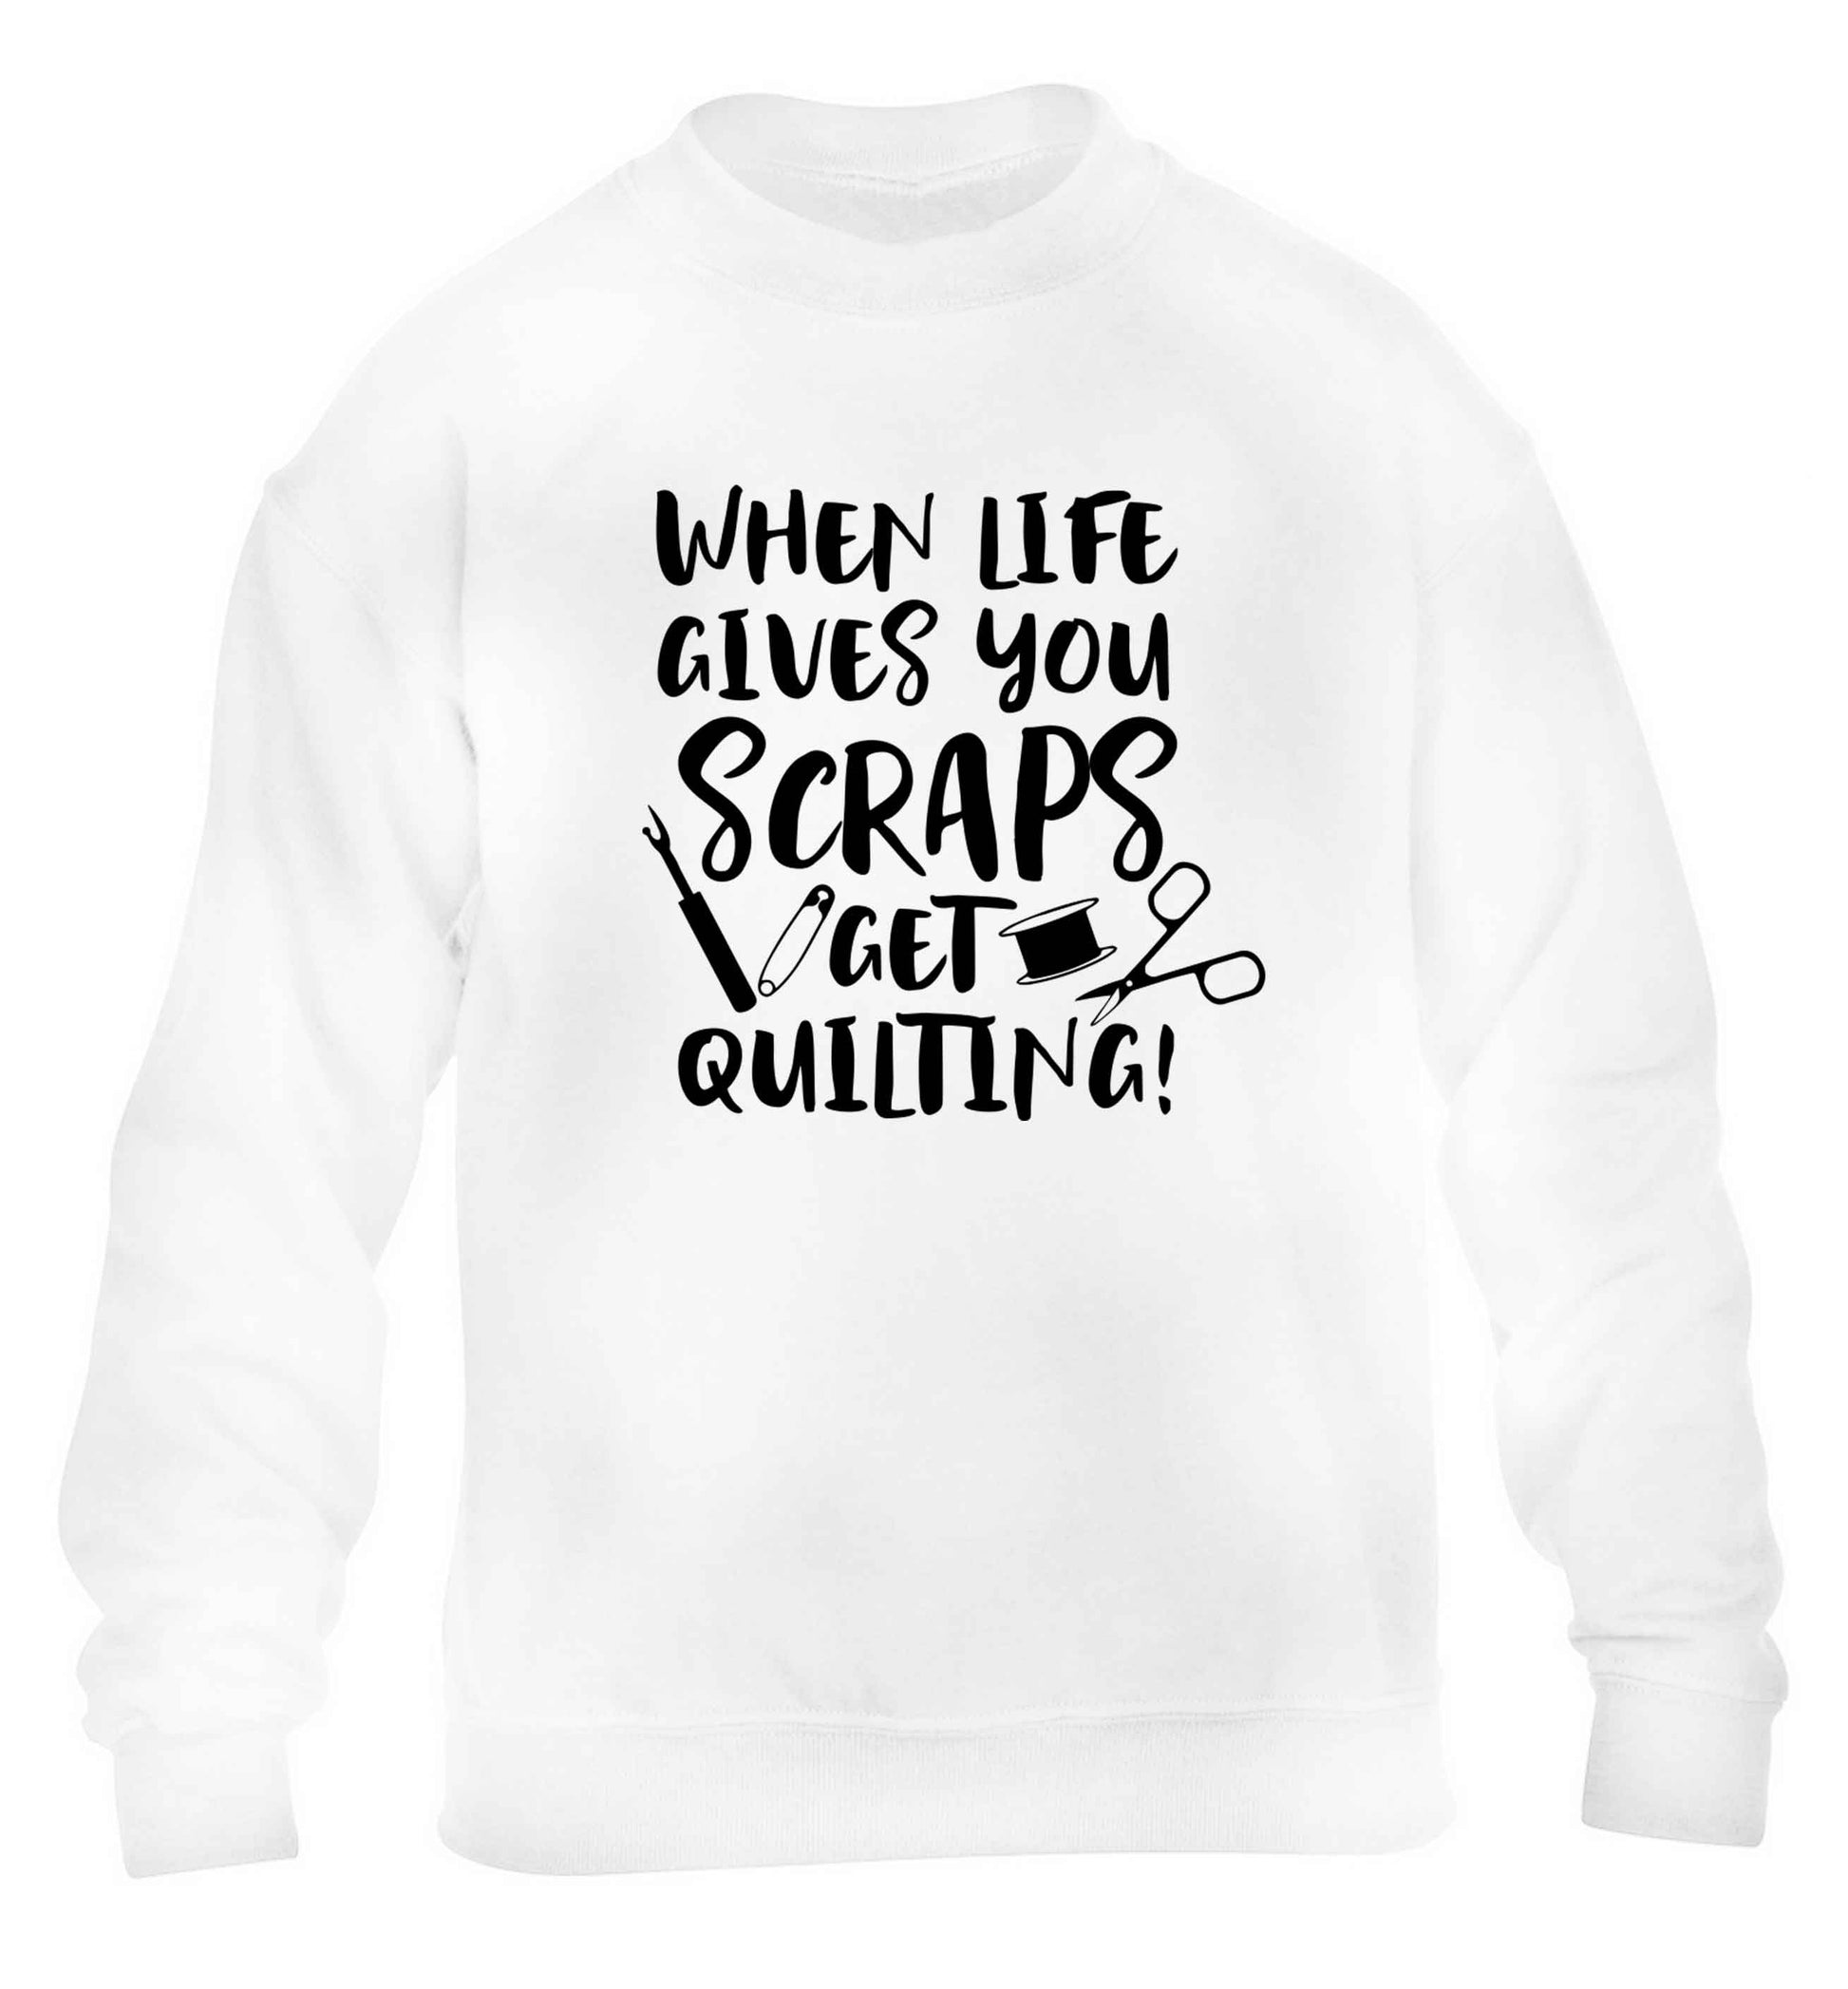 When life gives you scraps get quilting! children's white sweater 12-13 Years